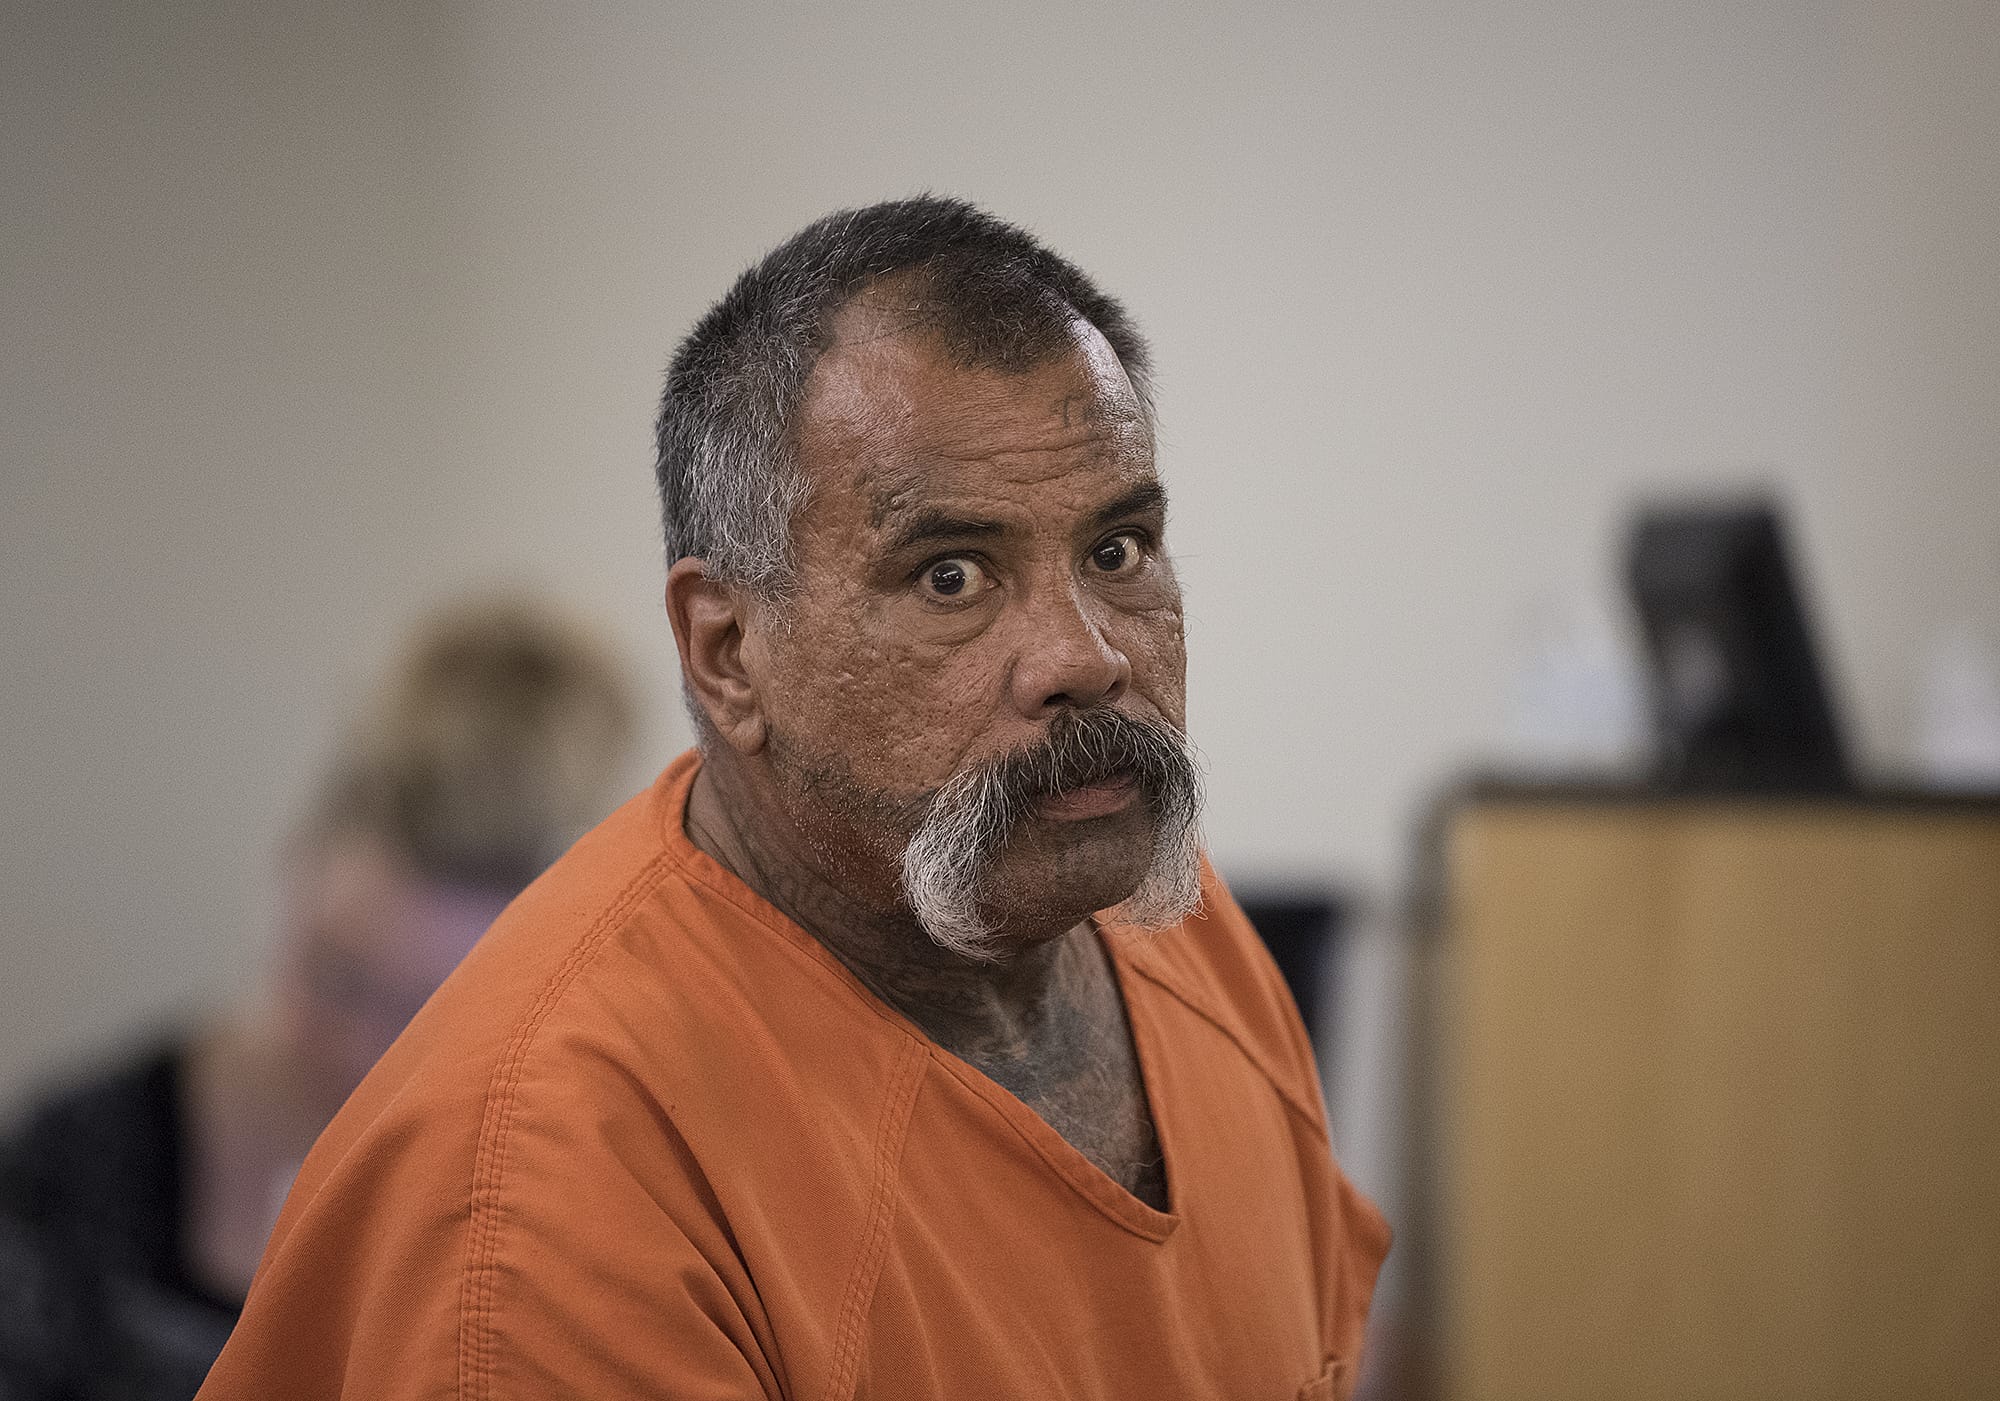 Henry Castillo makes a first appearance Monday morning, April 23, 2018, in Clark County Superior Court in connection with a robbery and stabbing. The victim, Scott Allen Chappelle, suffered a stab wound to his chest. He was in satisfactory condition Monday at a local hospital.